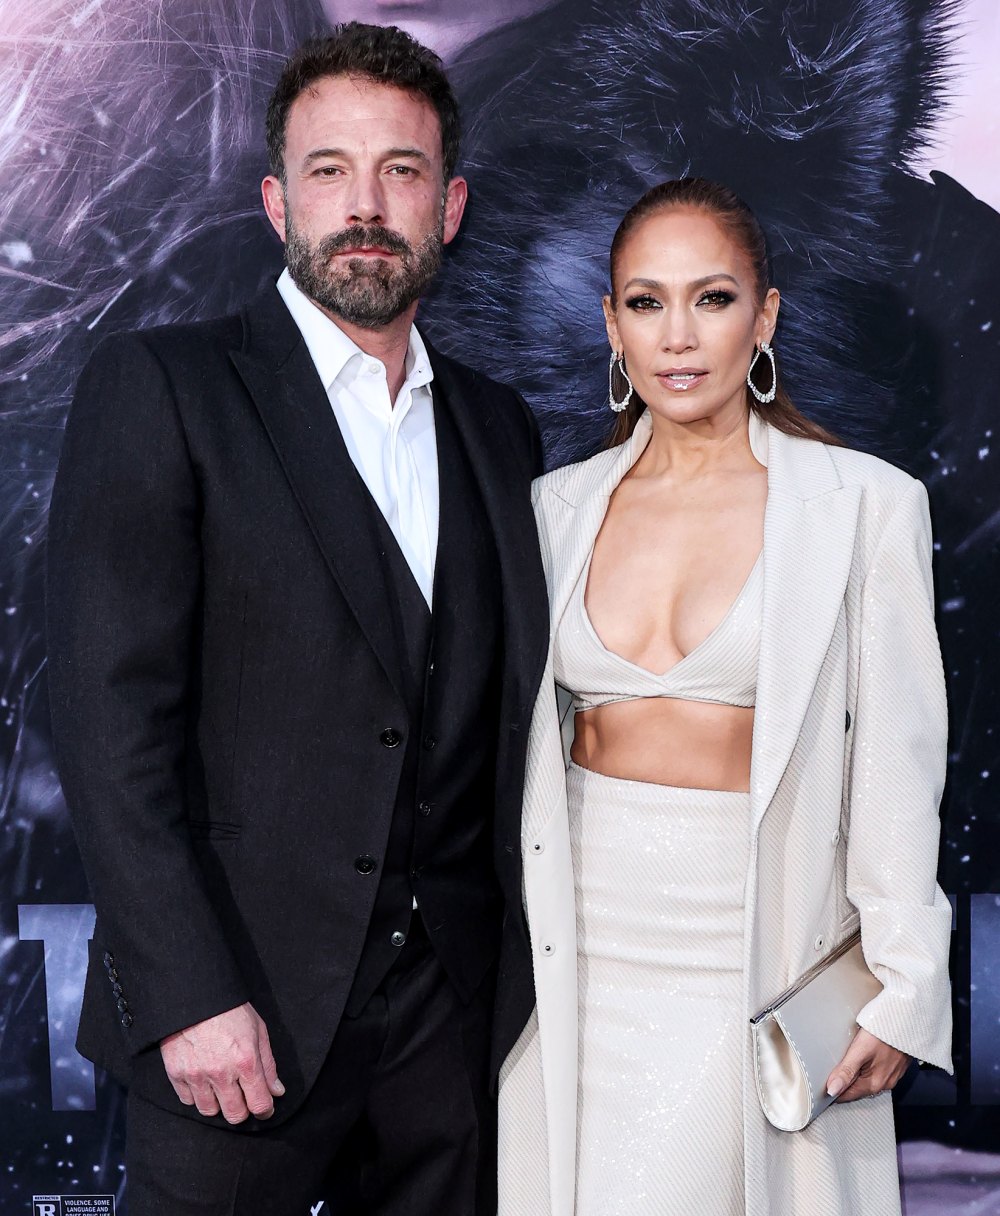 Jennifer Lopez’s Kids Max and Emme Are ‘Incredibly Close’ to Husband Ben Affleck: Inside Their Blended Family